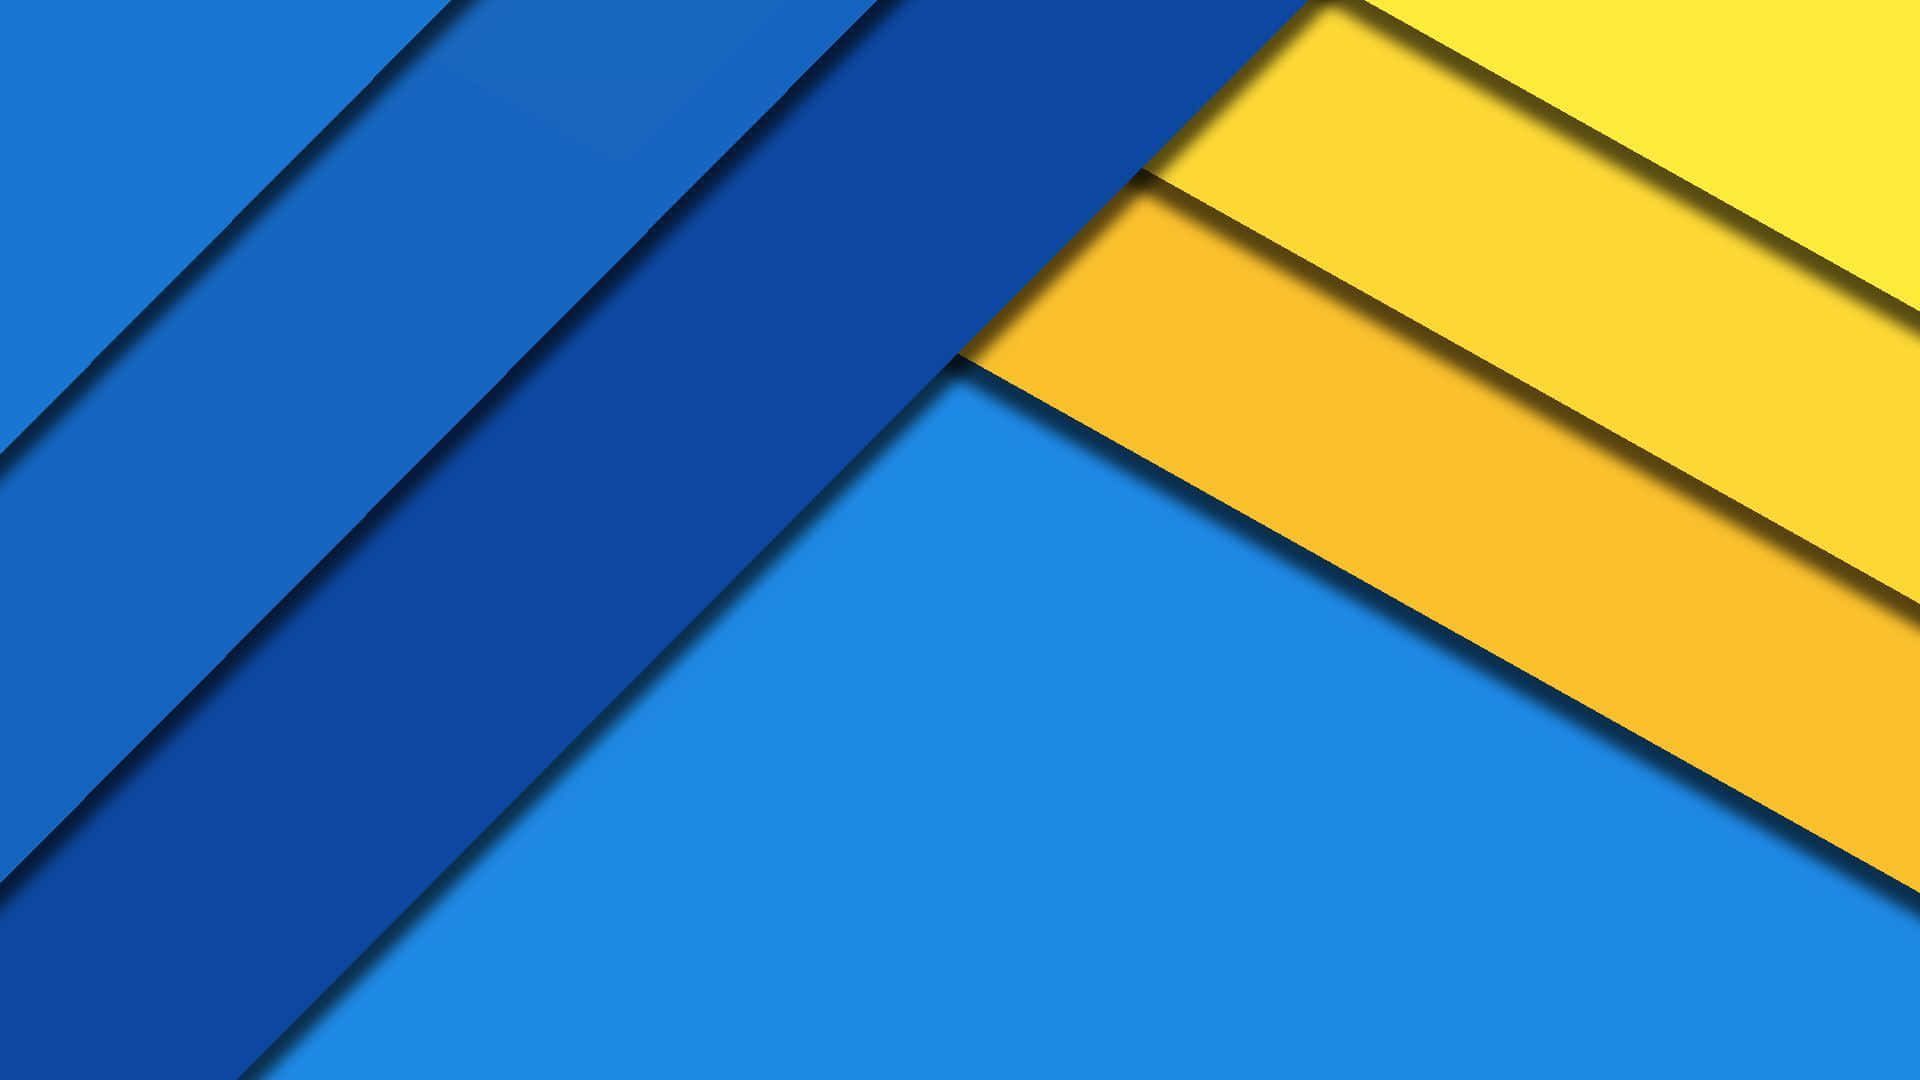 Blue And Yellow Background Diagonal Pattern